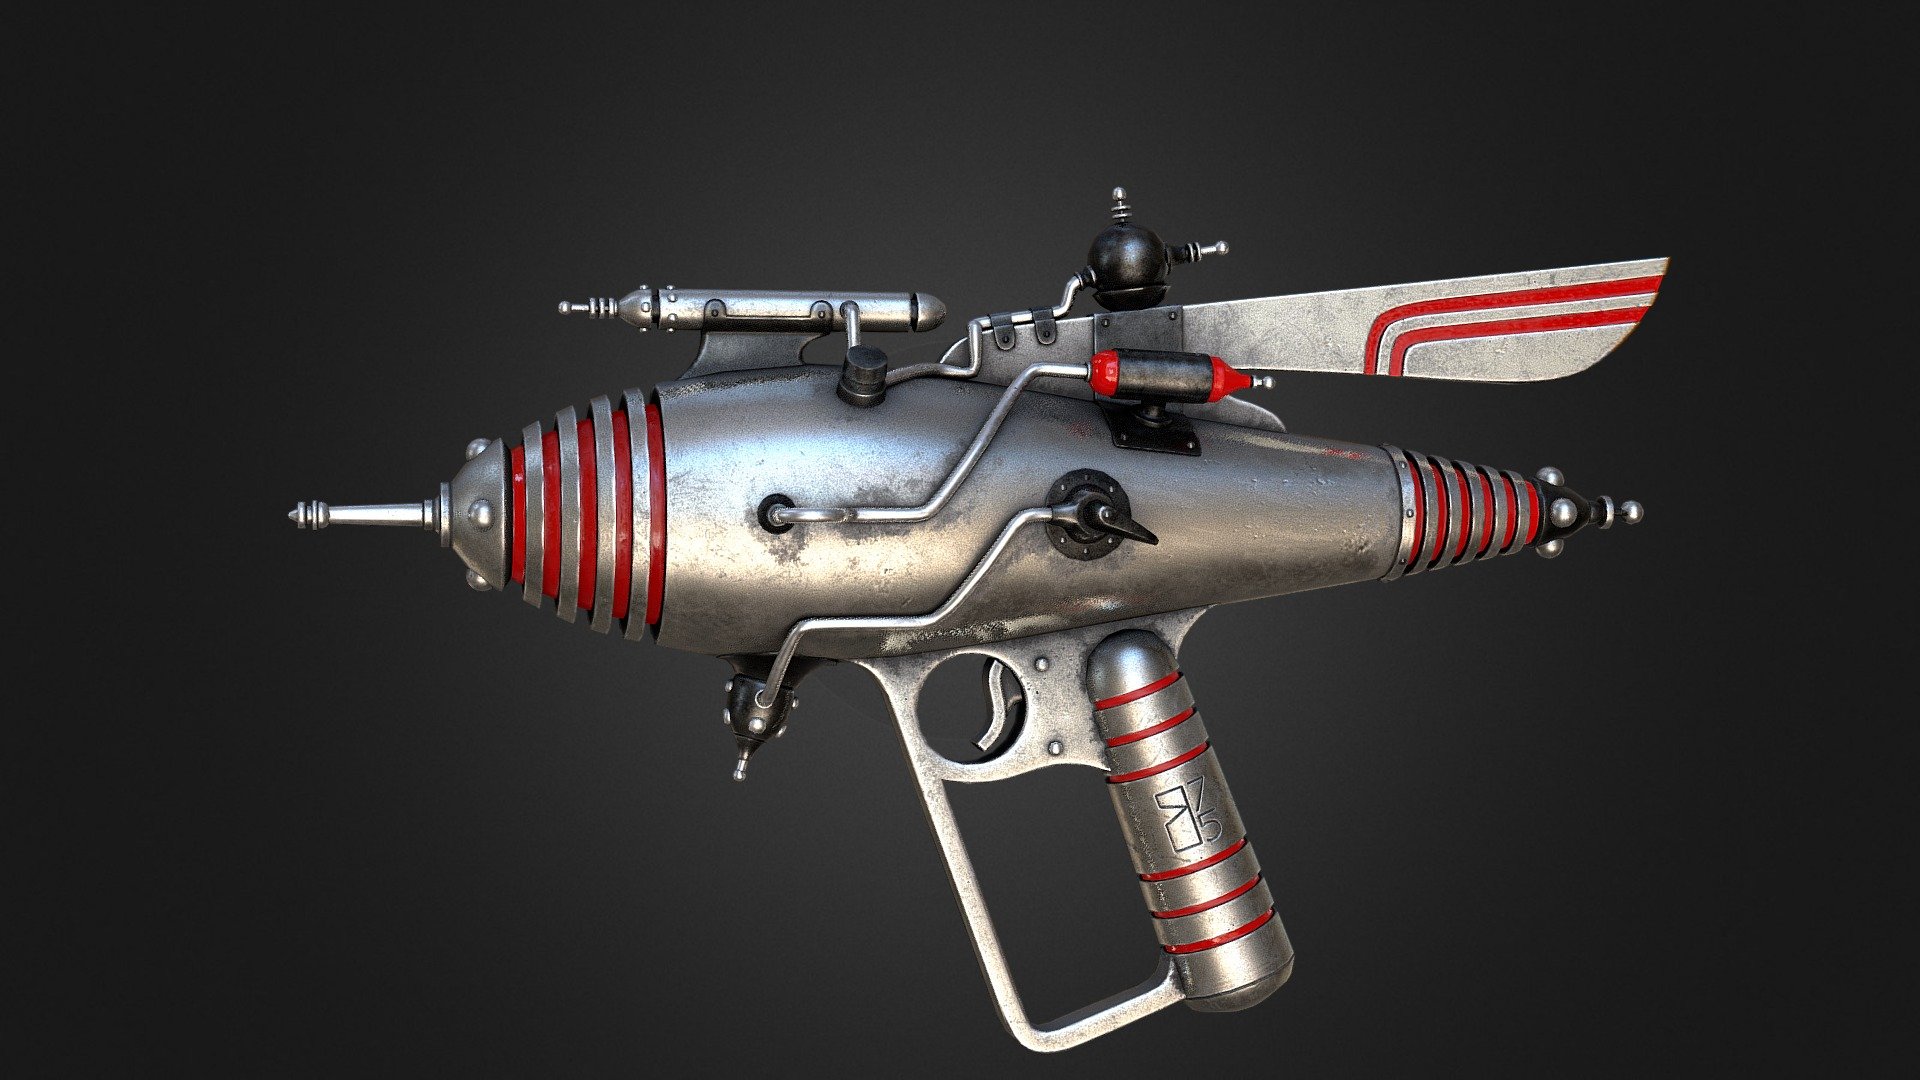 I made a lowpoly model of dr. Grordbort Pearce 75 gun.
Texture set is 2048px
Modeled with Blender
Textured with Substance Painter
Hope you like it.
 - Pearce 75 atom ray gun - 3D model by Oleh Ivanov (@ChEmlsT) 3d model